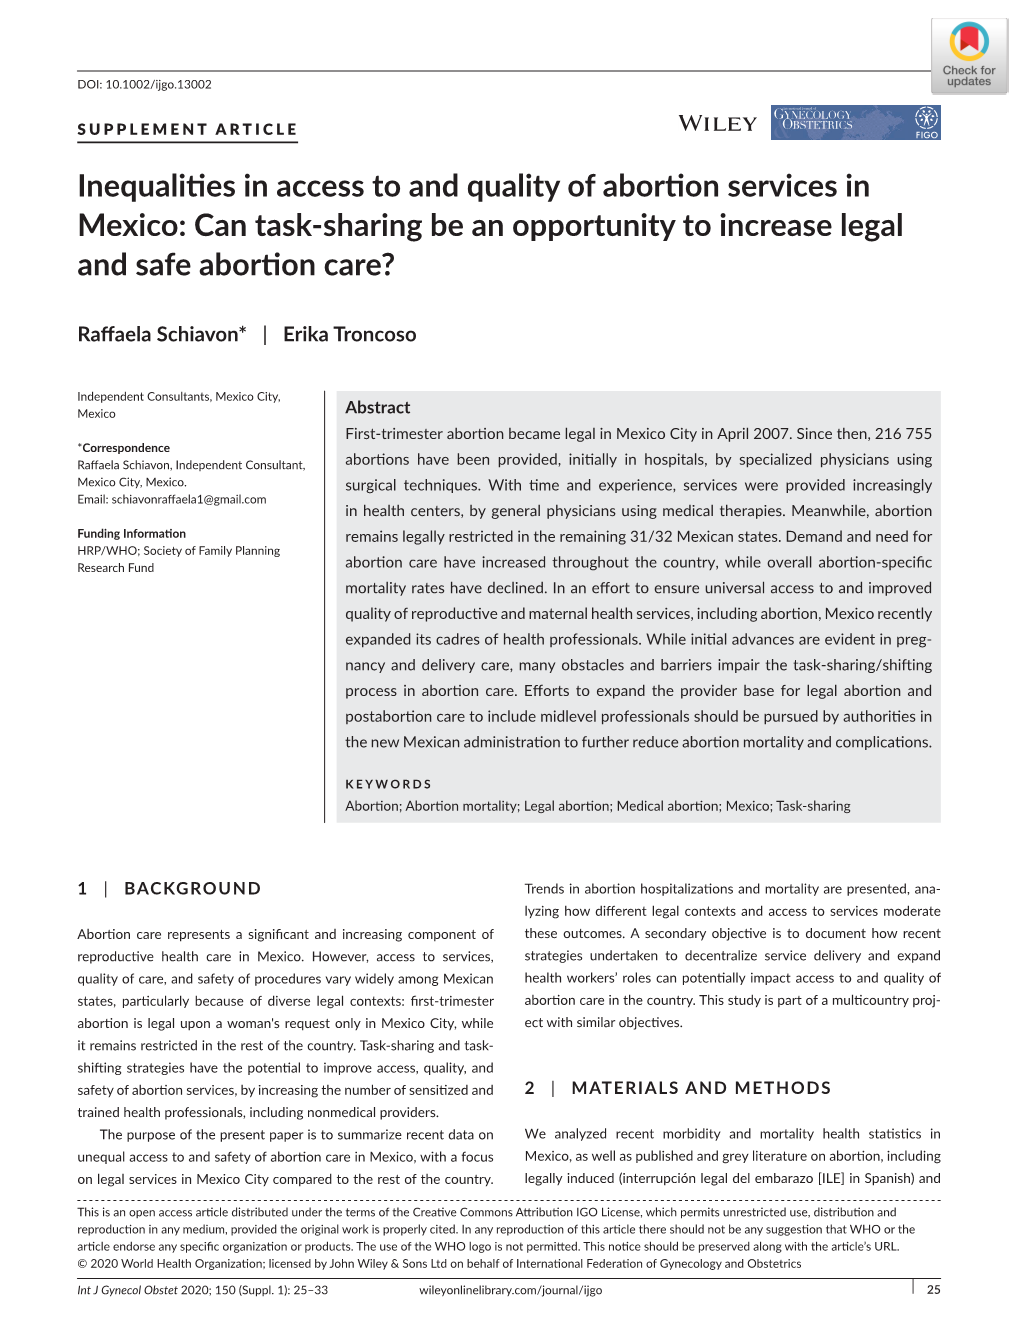 Inequalities in Access to and Quality of Abortion Services in Mexico: Can Task-­Sharing Be an Opportunity to Increase Legal and Safe Abortion Care?